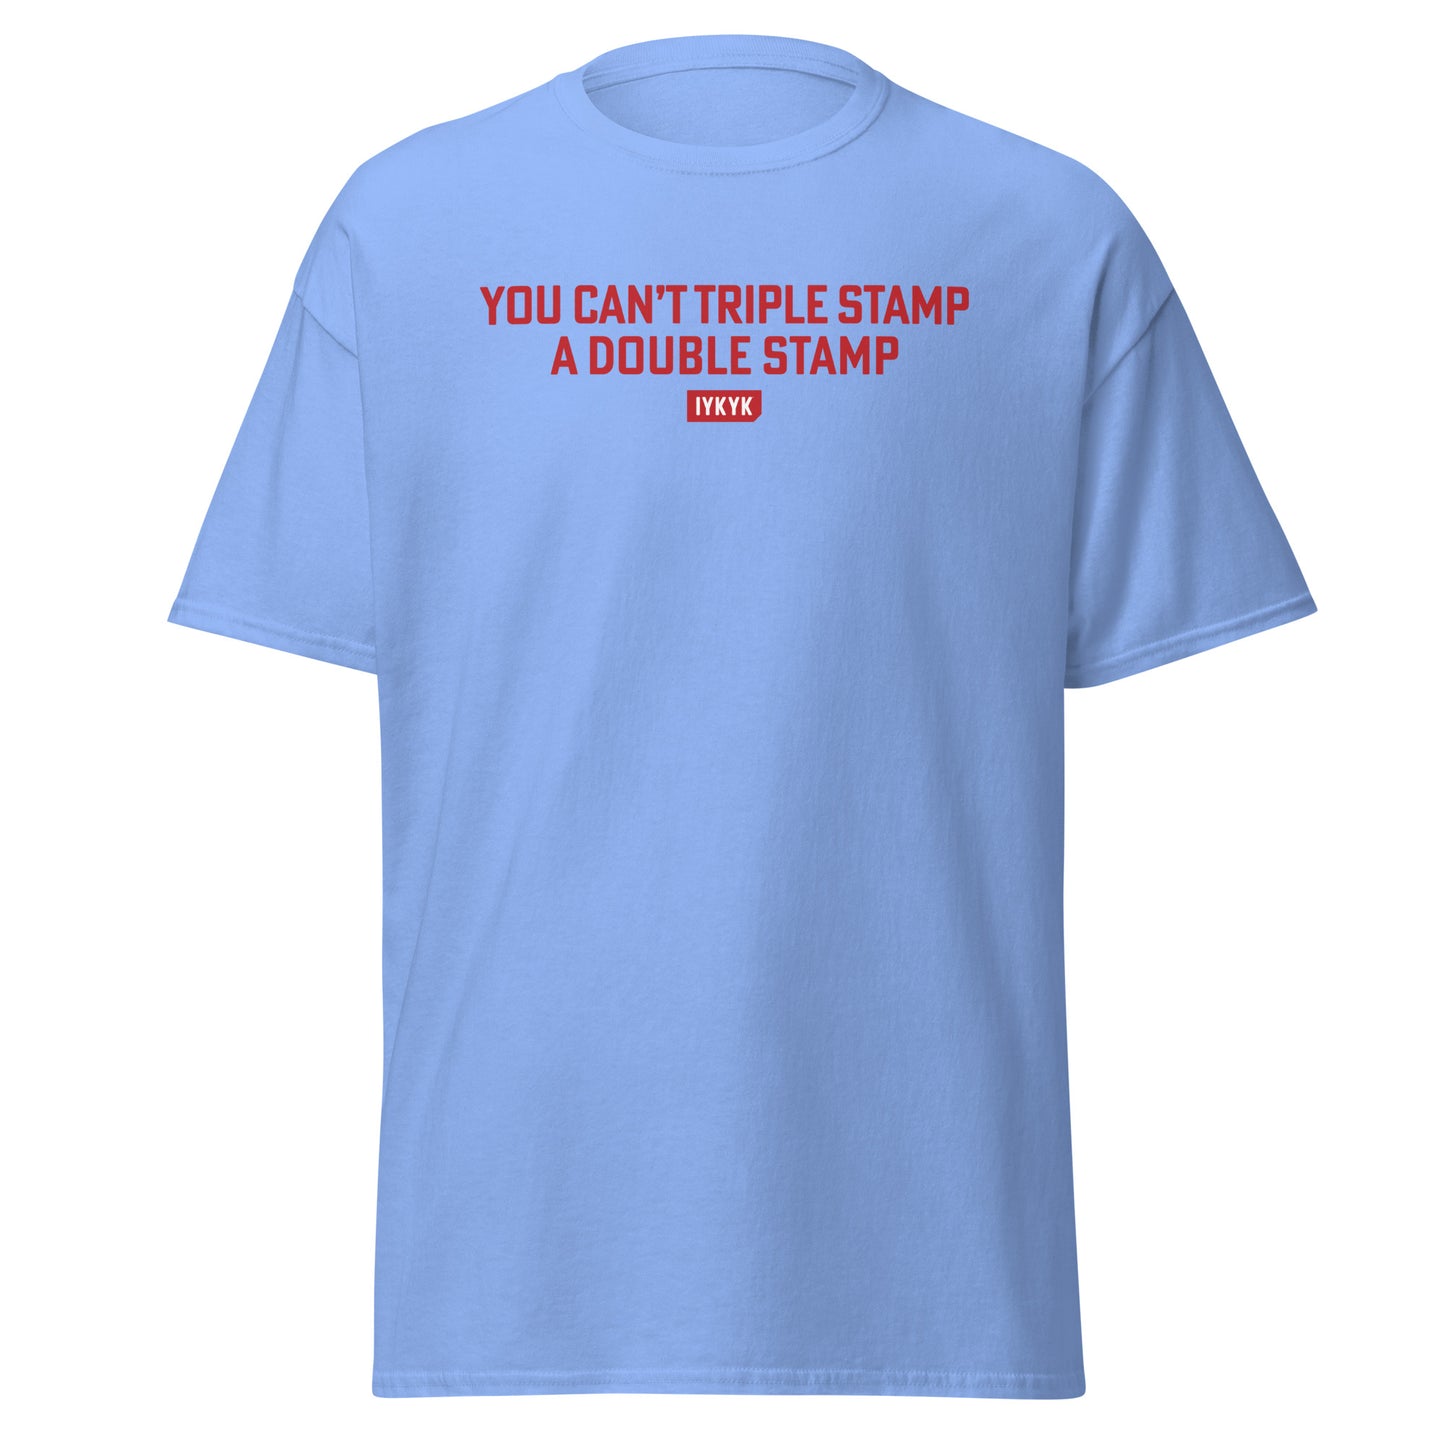 Classic Everyday Can't Triple Stamp A Double Stamp Dumb & Dumber Tee